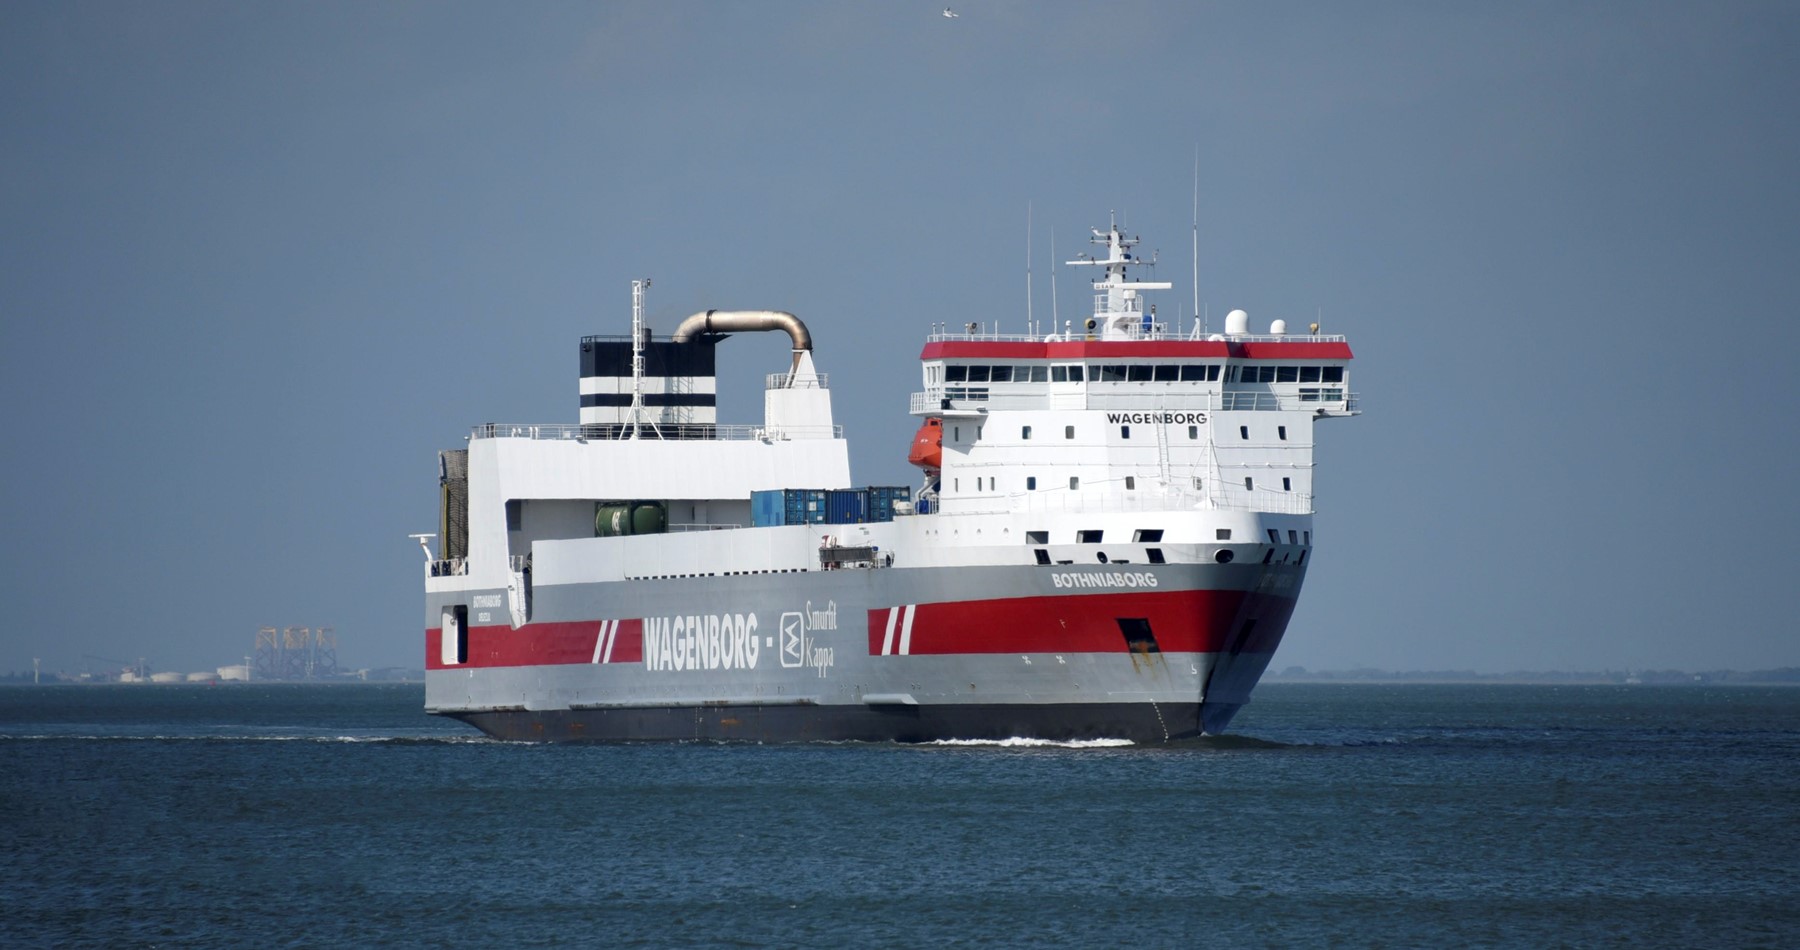 Wagenborg strengthens its position in the greater Stockholm area with expanded RORO liner service